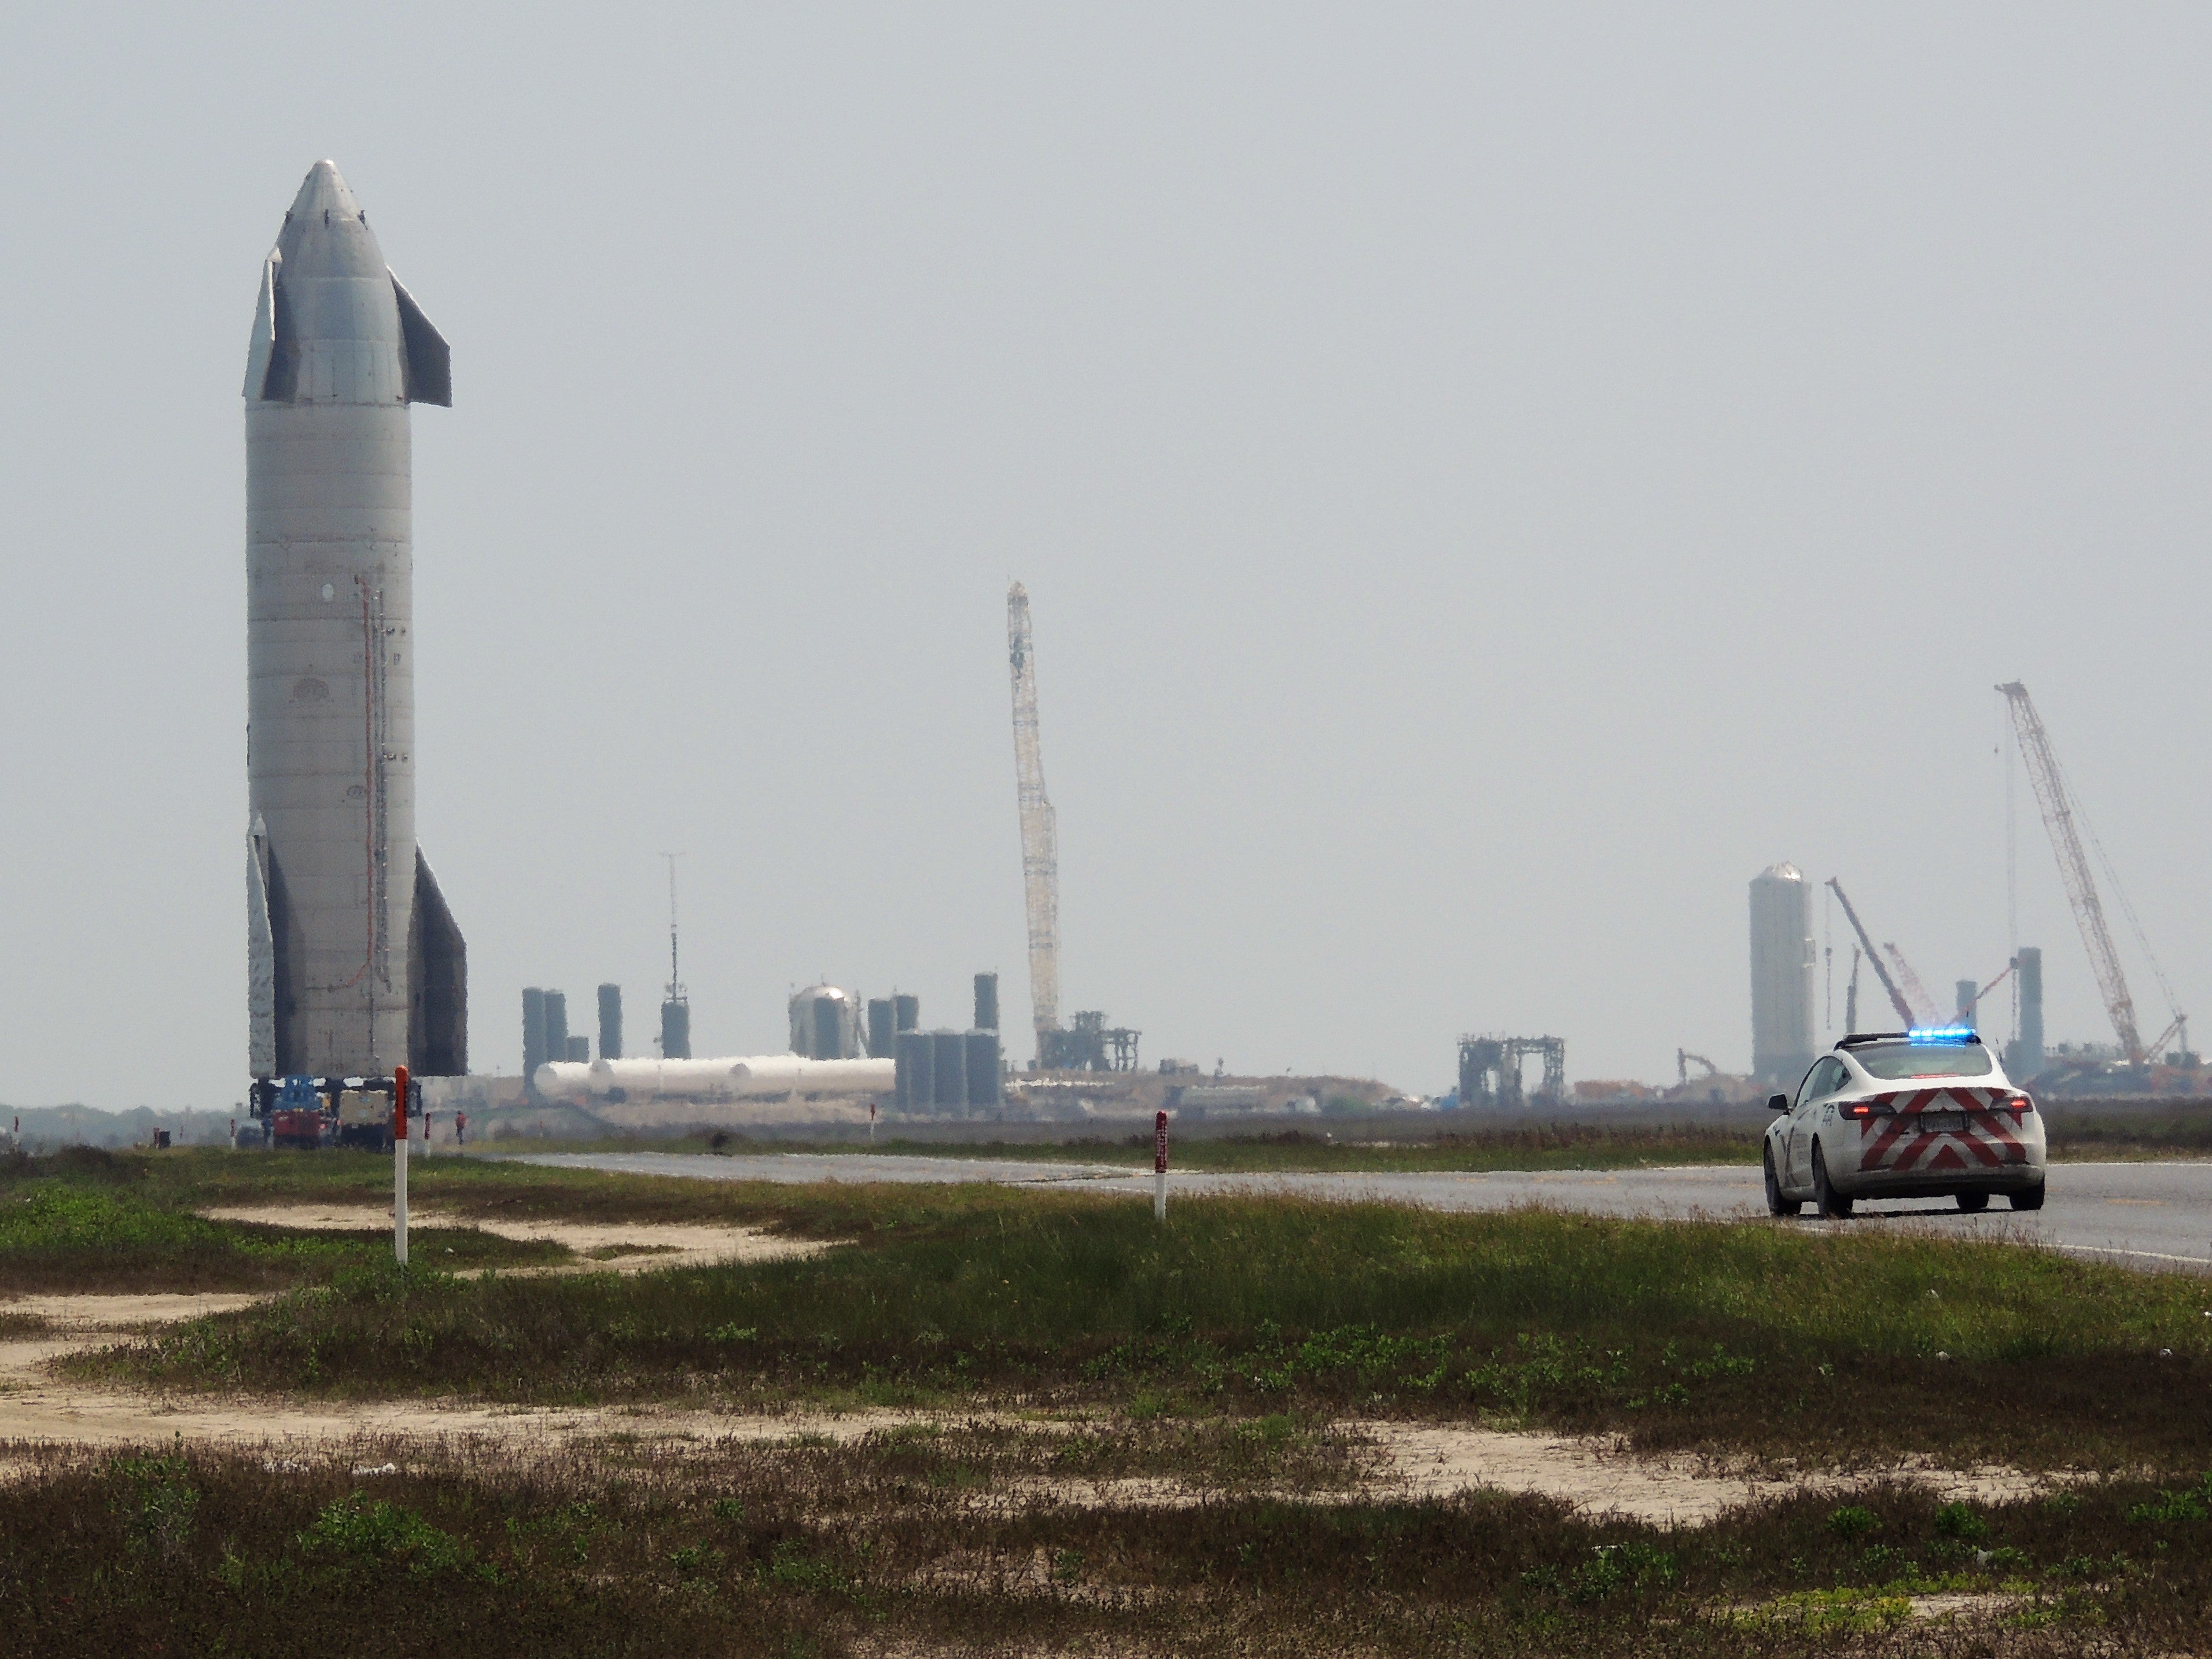 Starship SN15 rolling out to the launchpad at SpaceX’s Boca Chica facility in Texas on 8 April, 2021